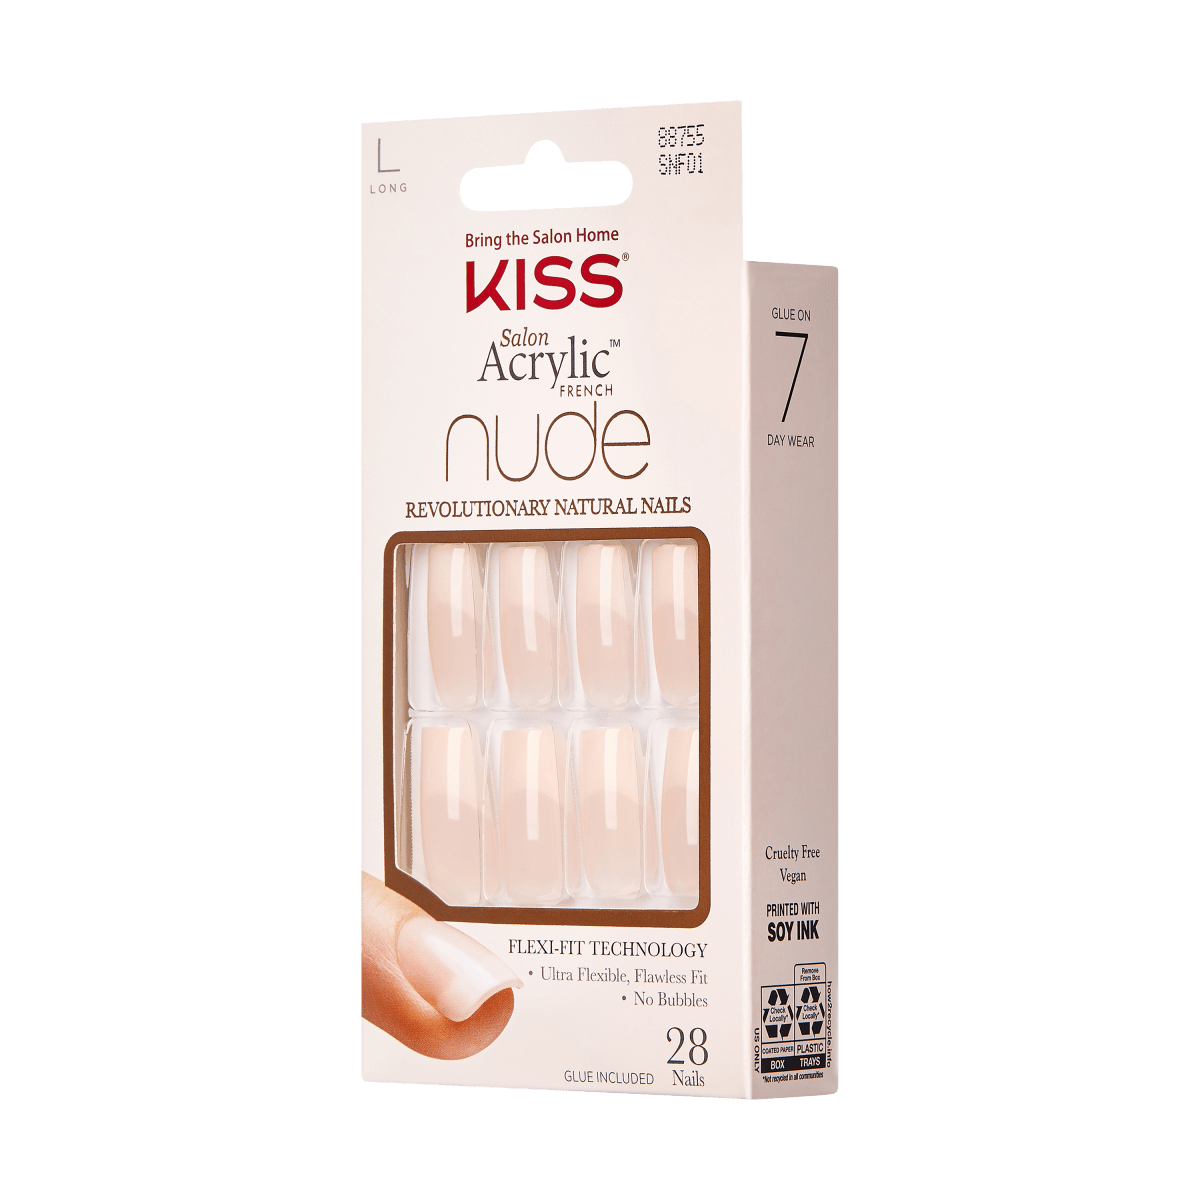 KISS Salon Acrylic French Nude Nails - Reveal It